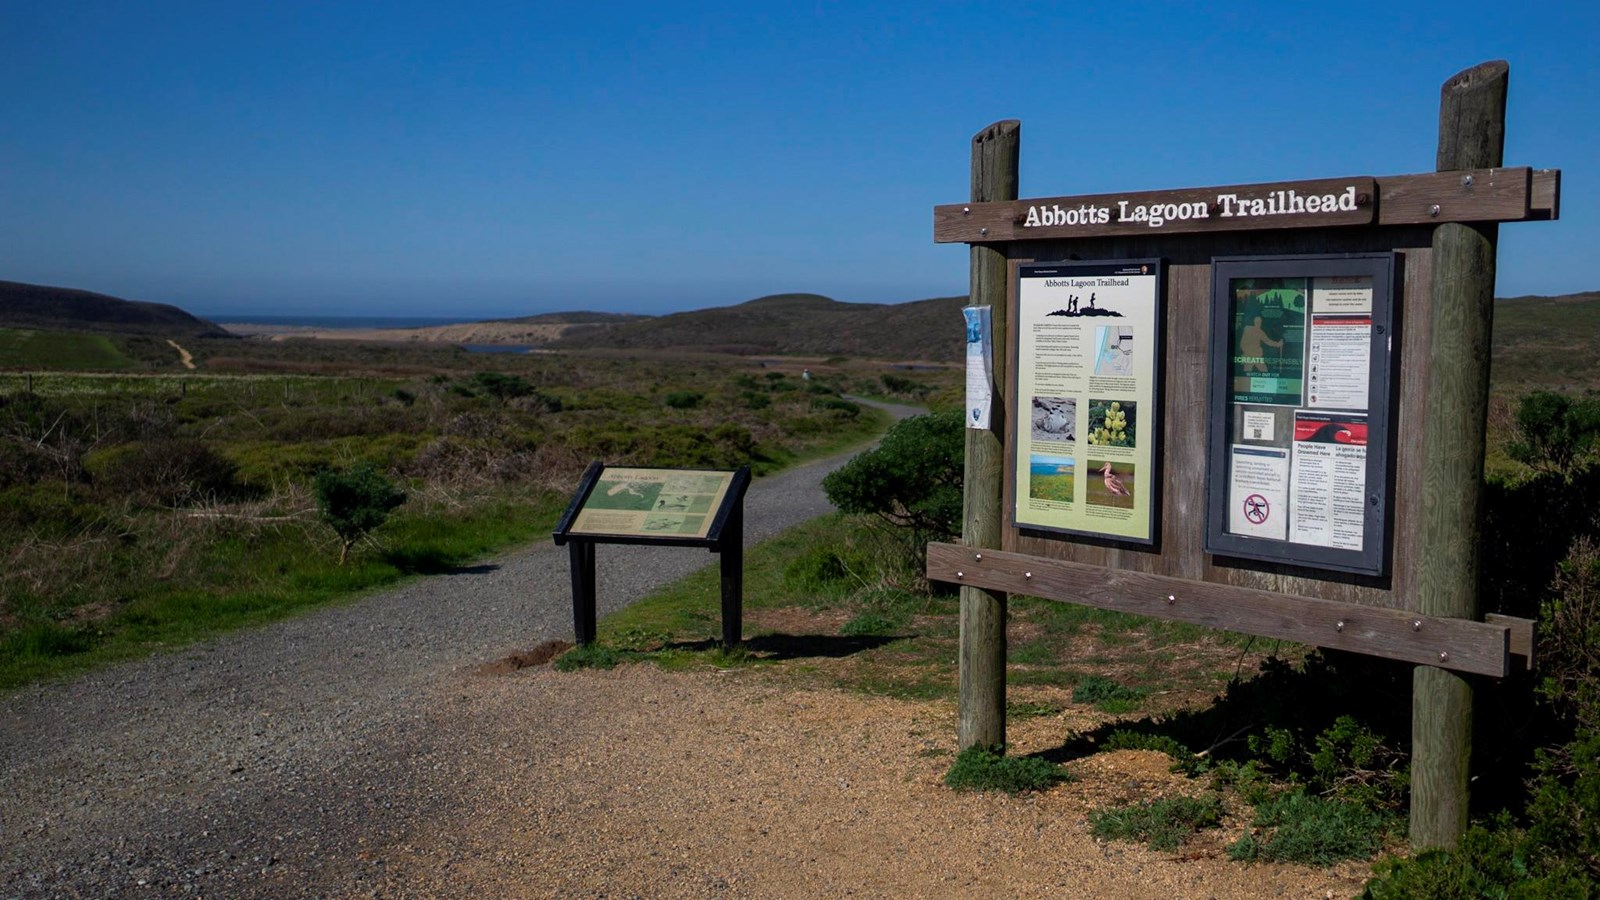 The Abbotts Lagoon trailhead bulletin board and wayside and the trail leading to lagoons and ocean.